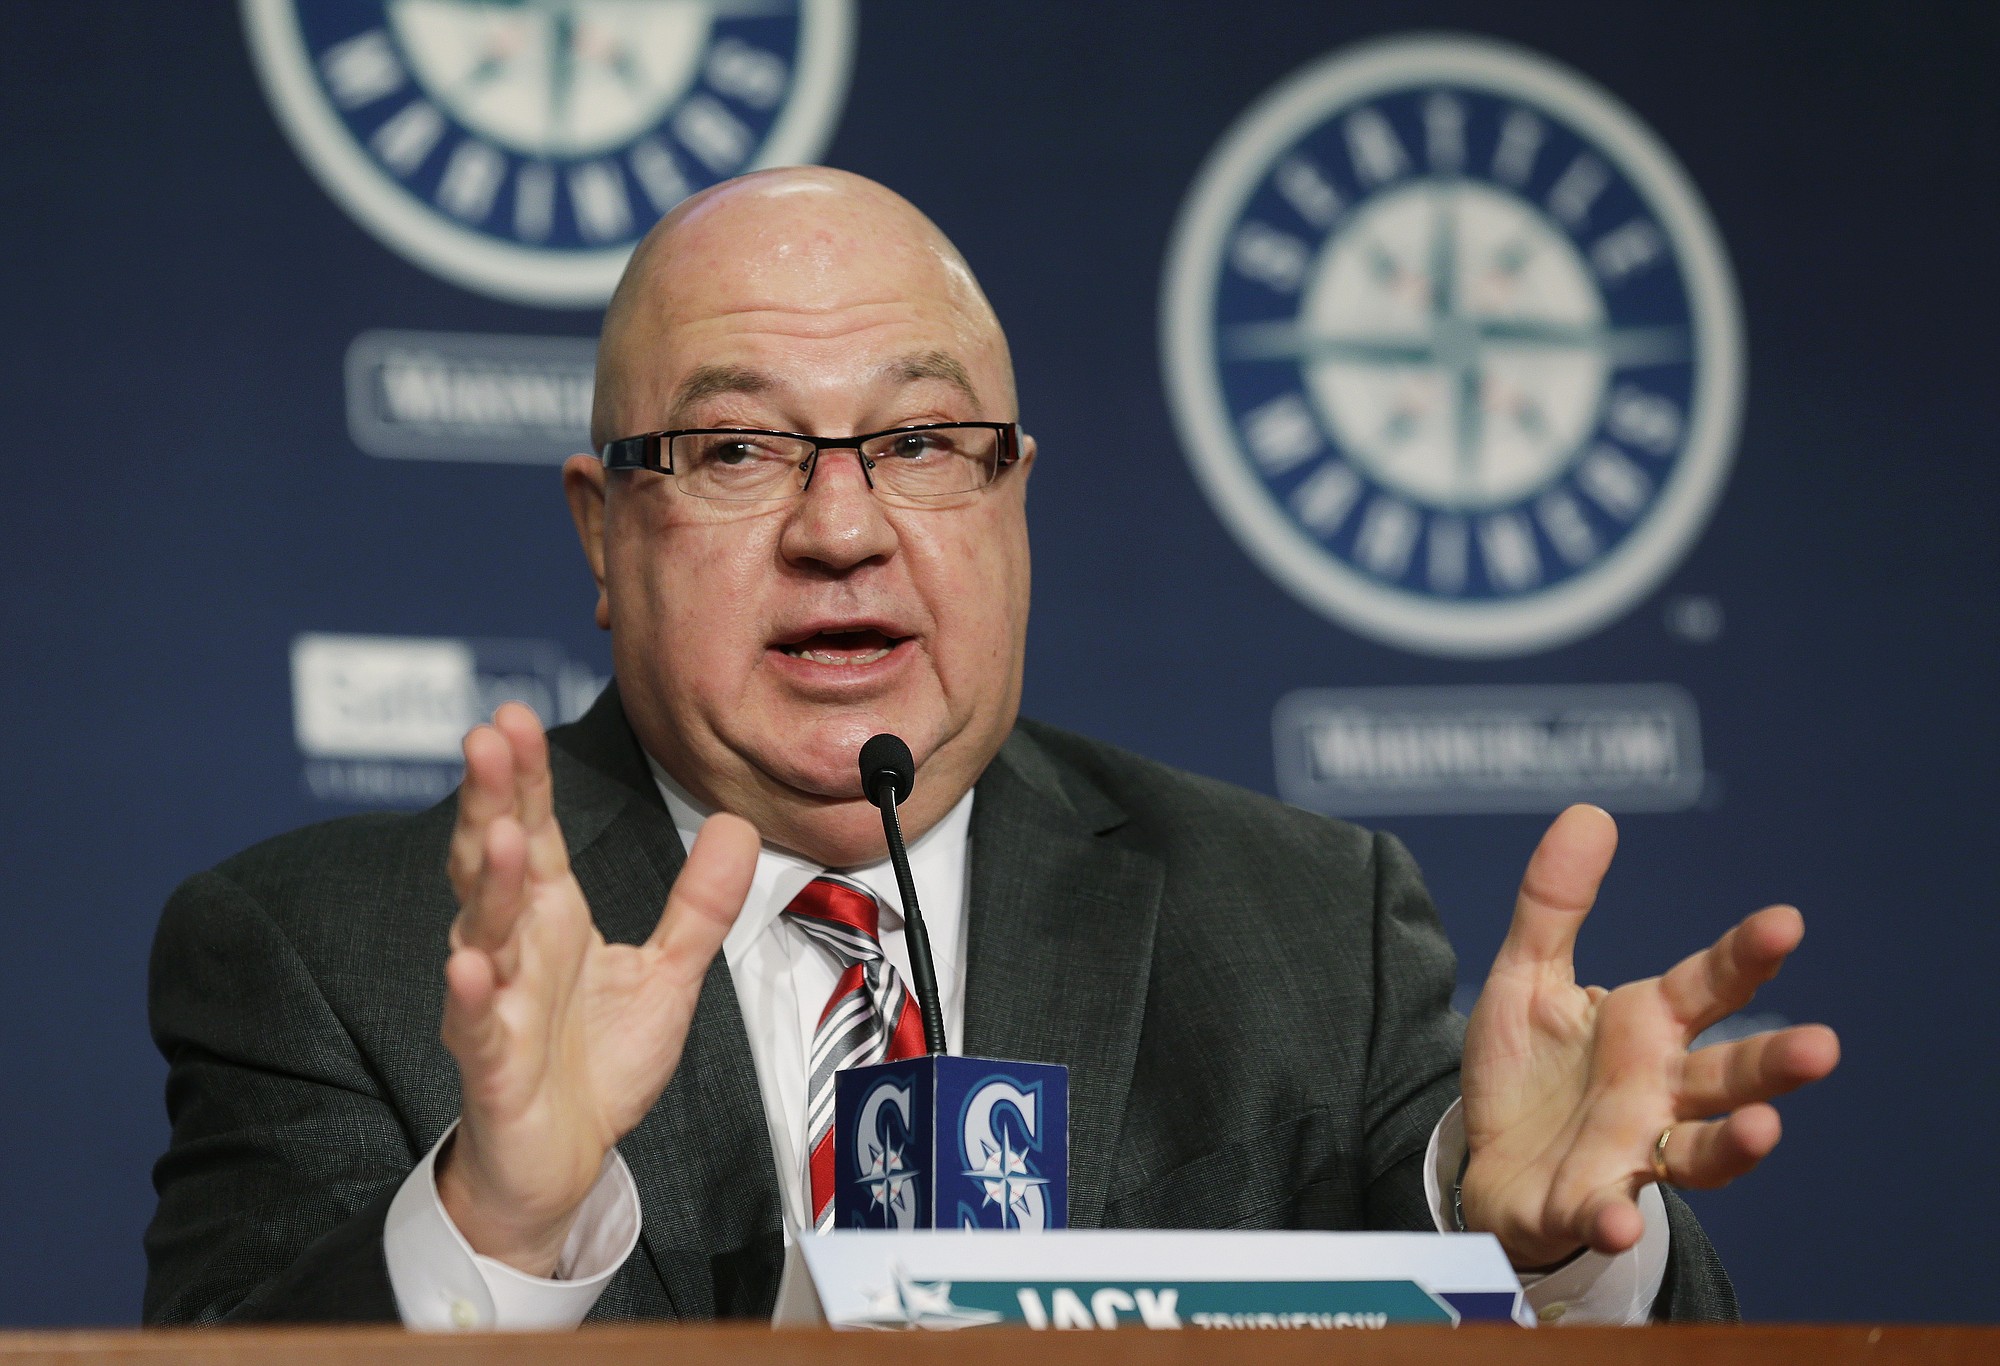 Seattle Mariners general manager Jack Zduriencik talks to reporters Jan. 22 at a press conference in Seattle. The Mariners have fired Zduriencik after seven disappointing seasons during which the club failed to end its playoff drought. Team President Kevin Mather announced the decision to fire Zduriencik on Friday. Assistant general manager Jeff Kingston will take over on an interim basis. (AP Photo/Ted S.